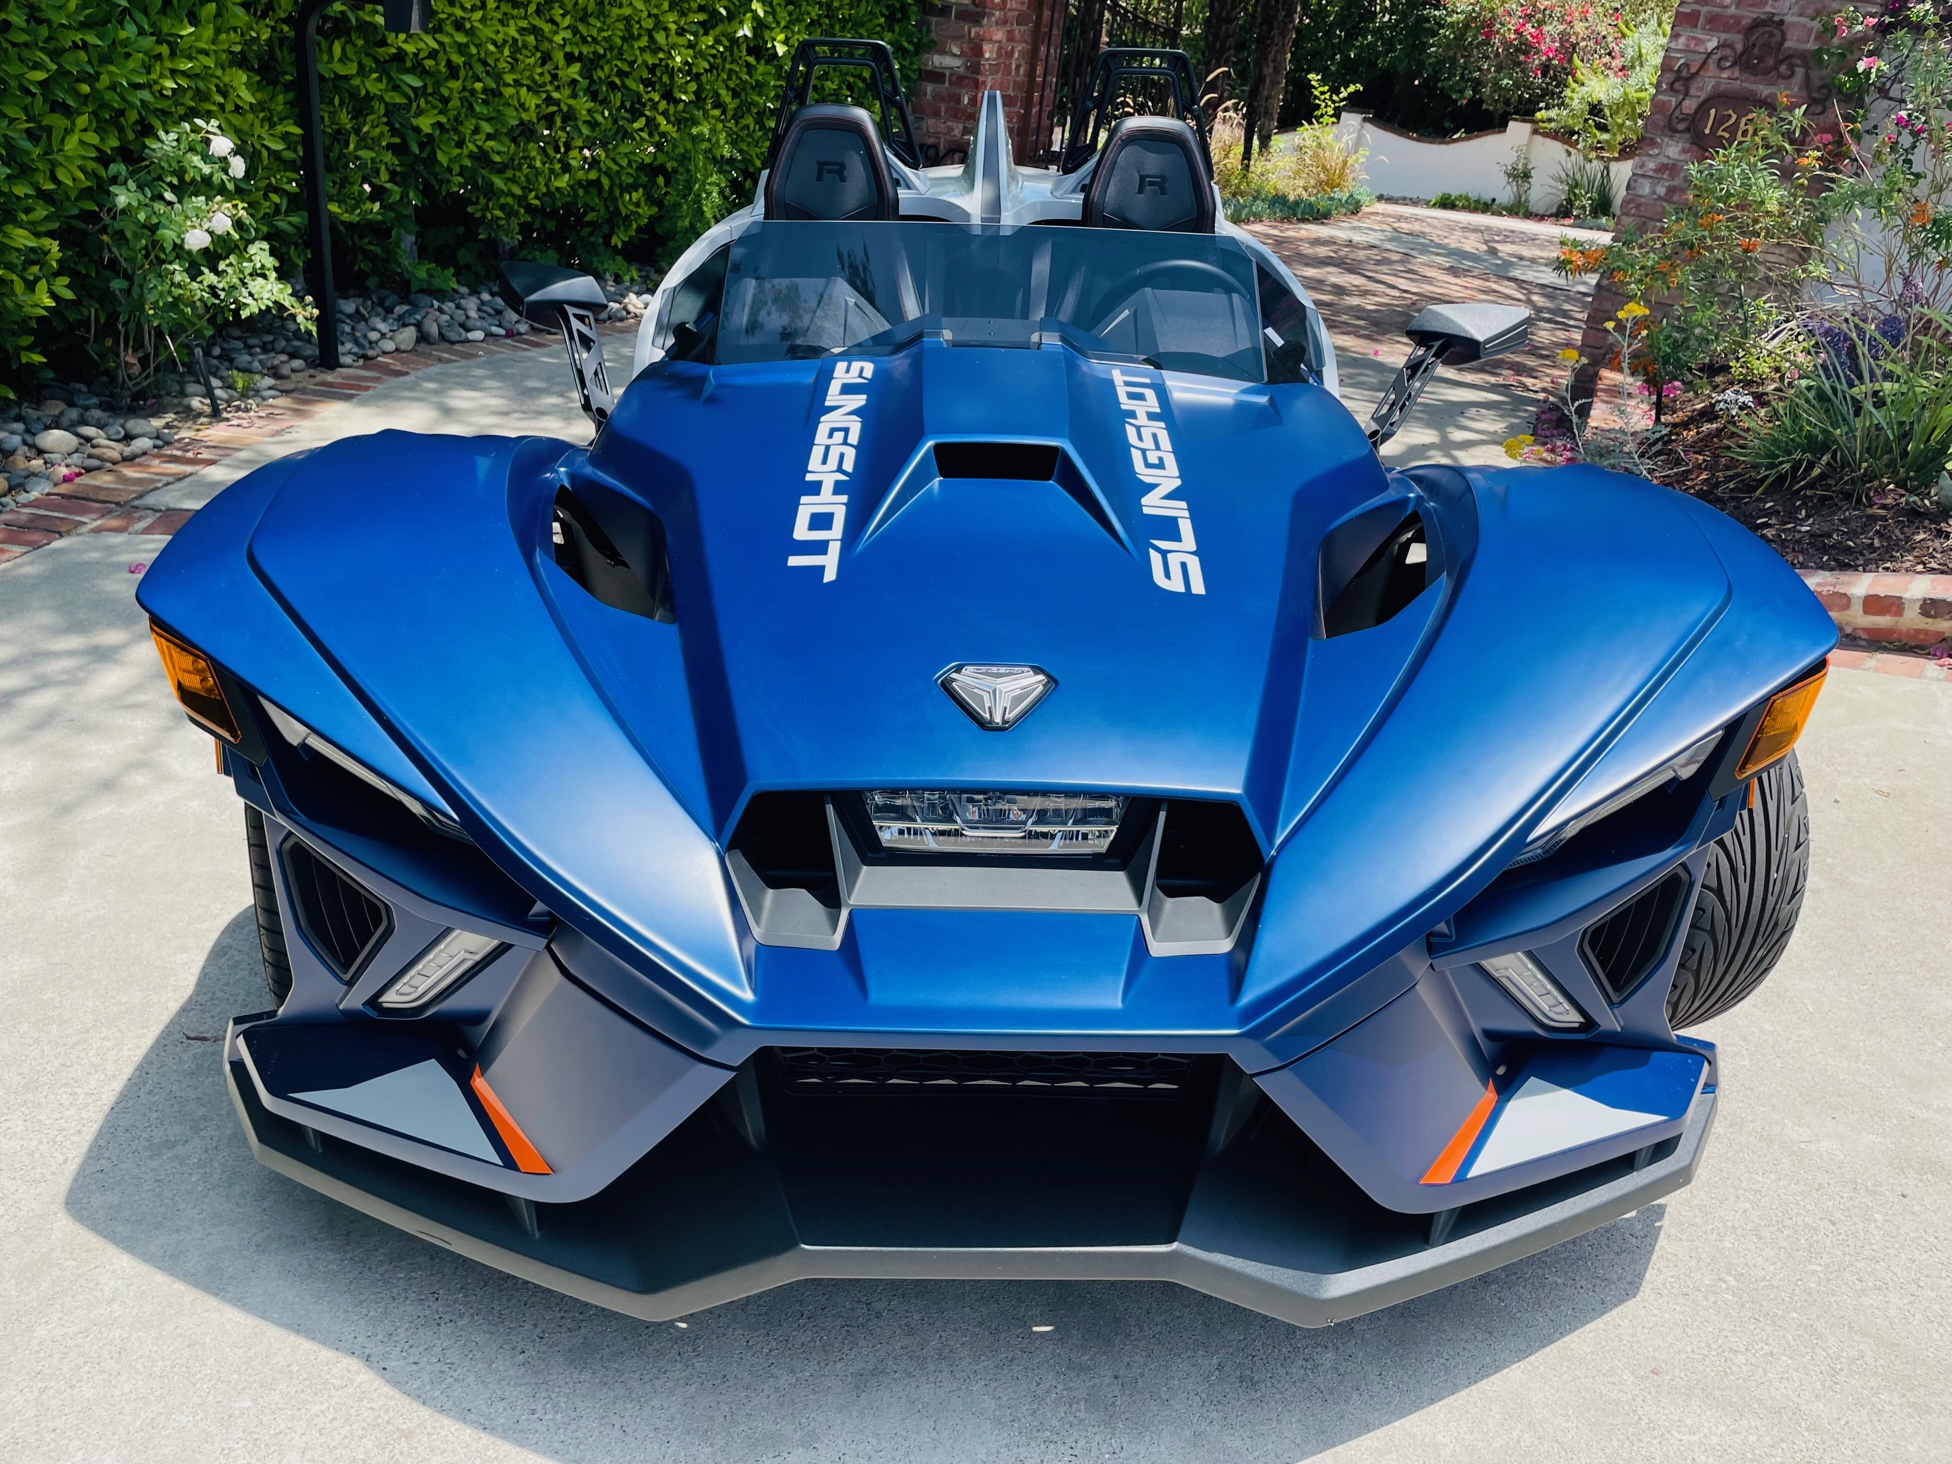 The Polaris Slingshot Offers a Wow Experience